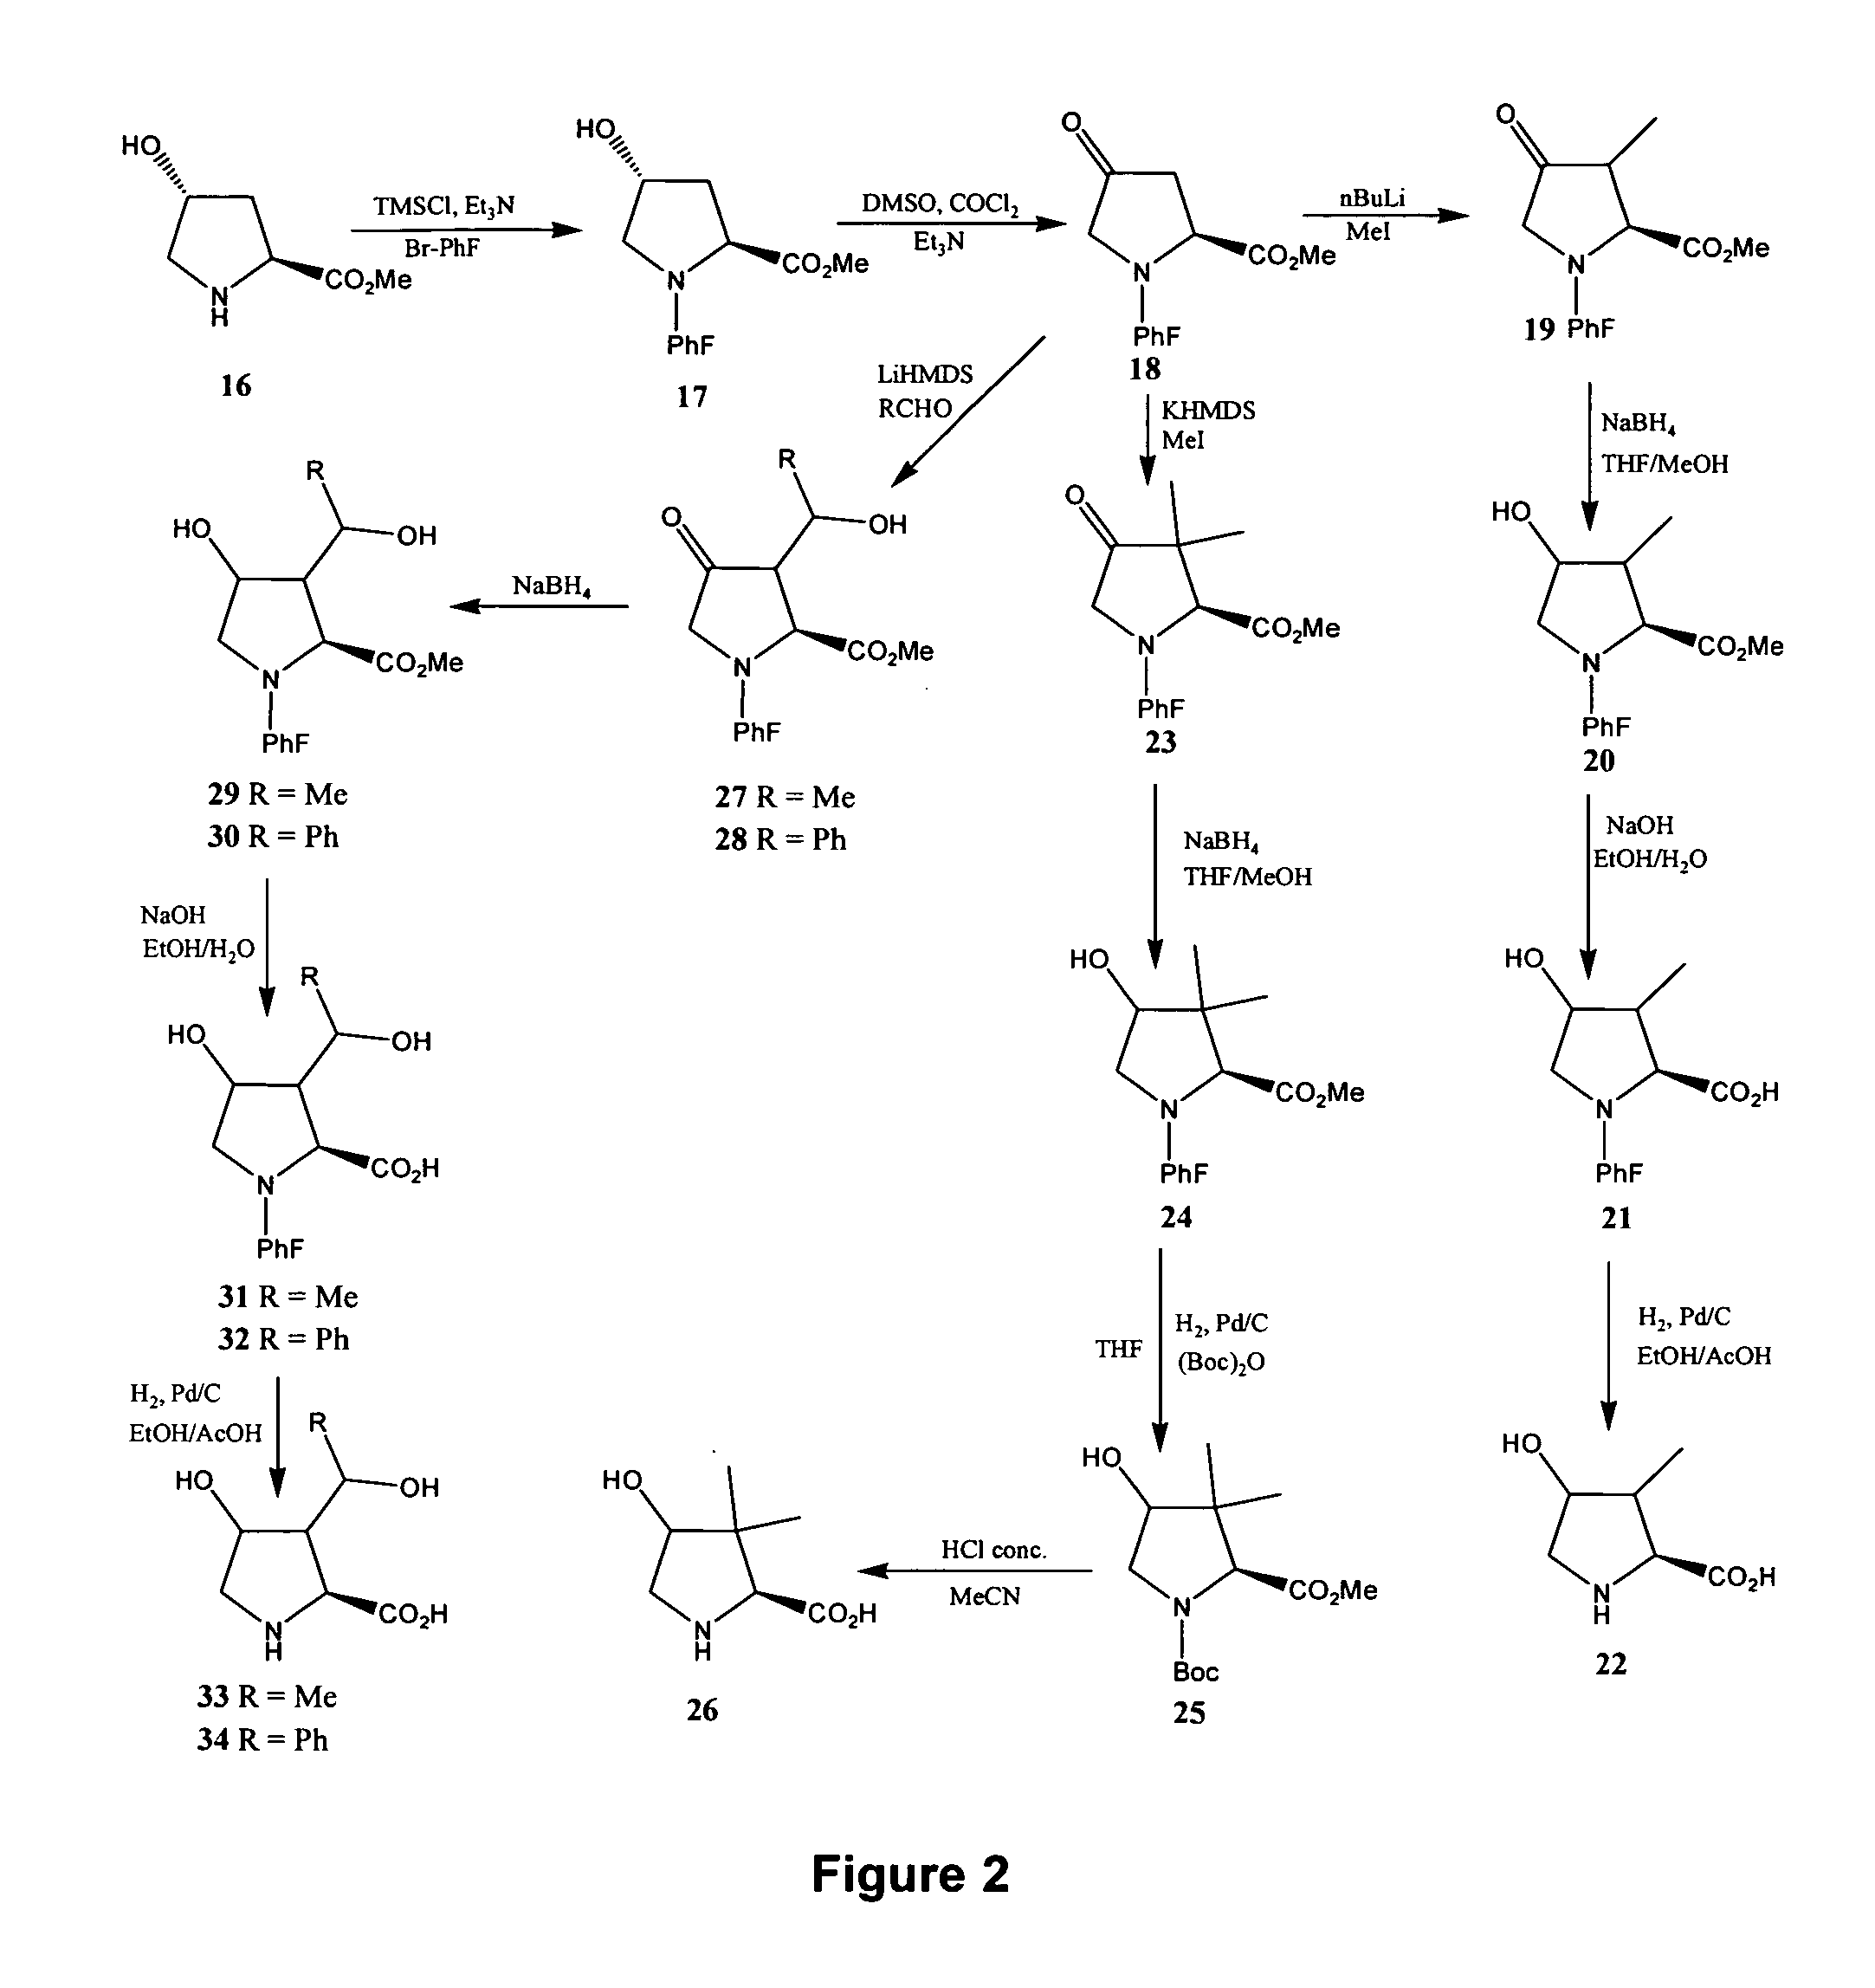 Analogs of 4-hydroxyisoleucine and uses thereof